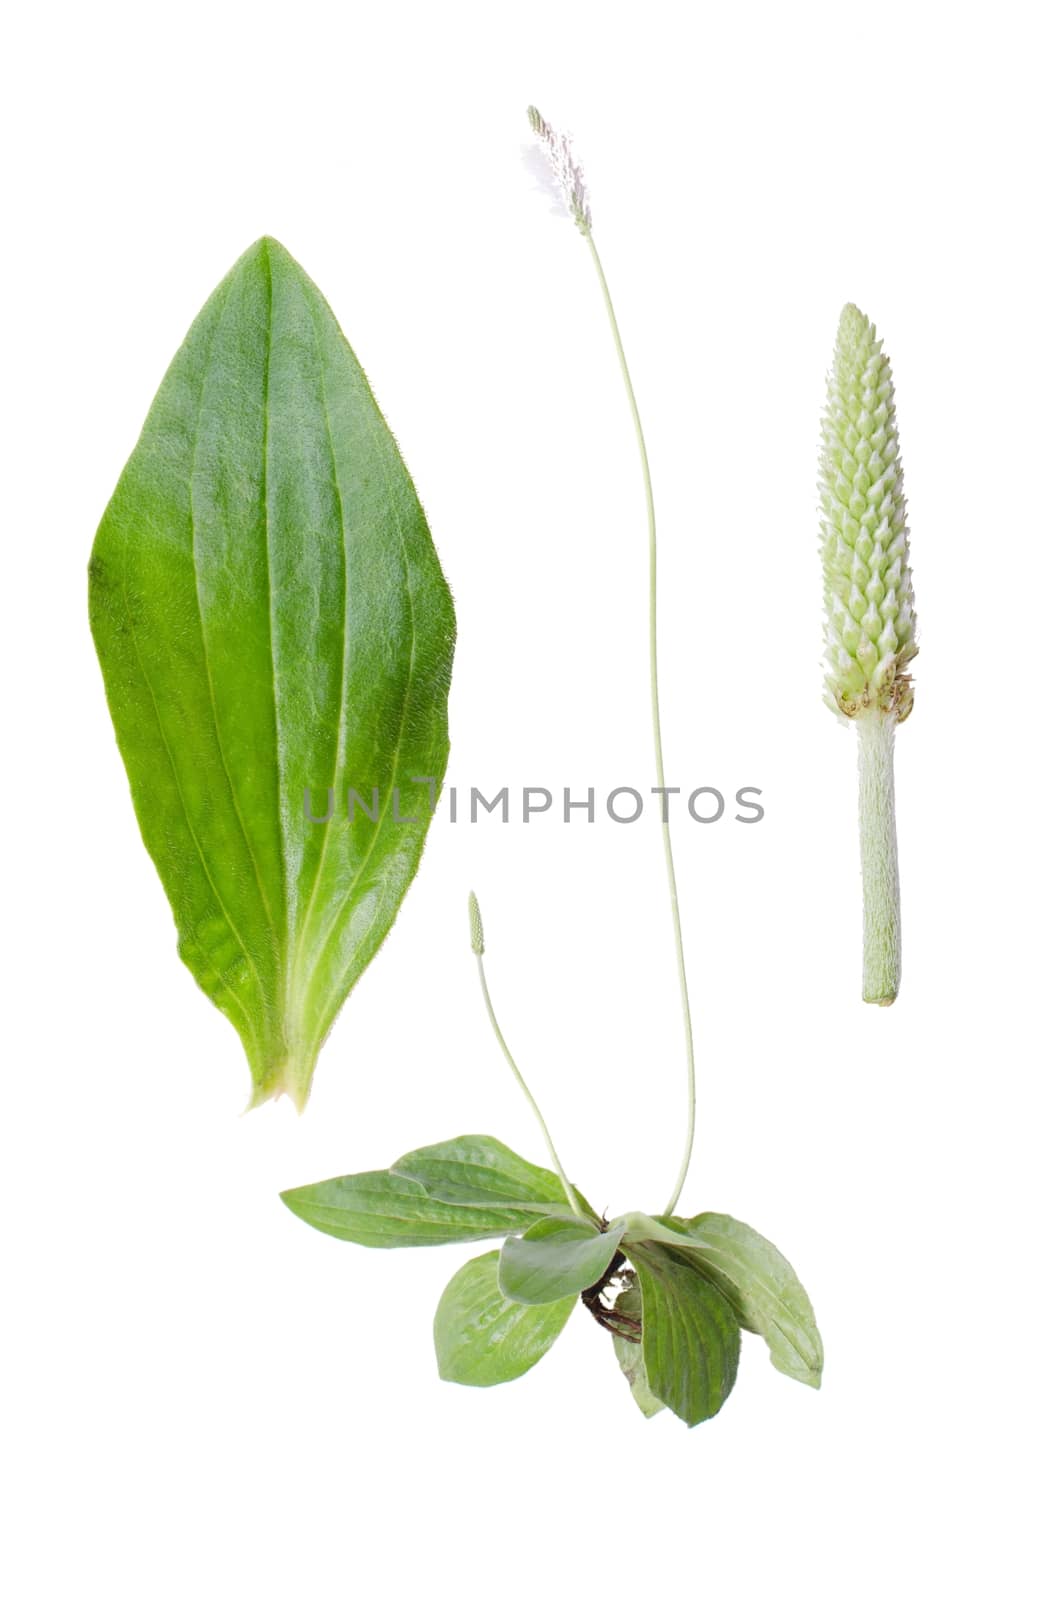 Plantago media and details of bloom na leaf isolated on white background.